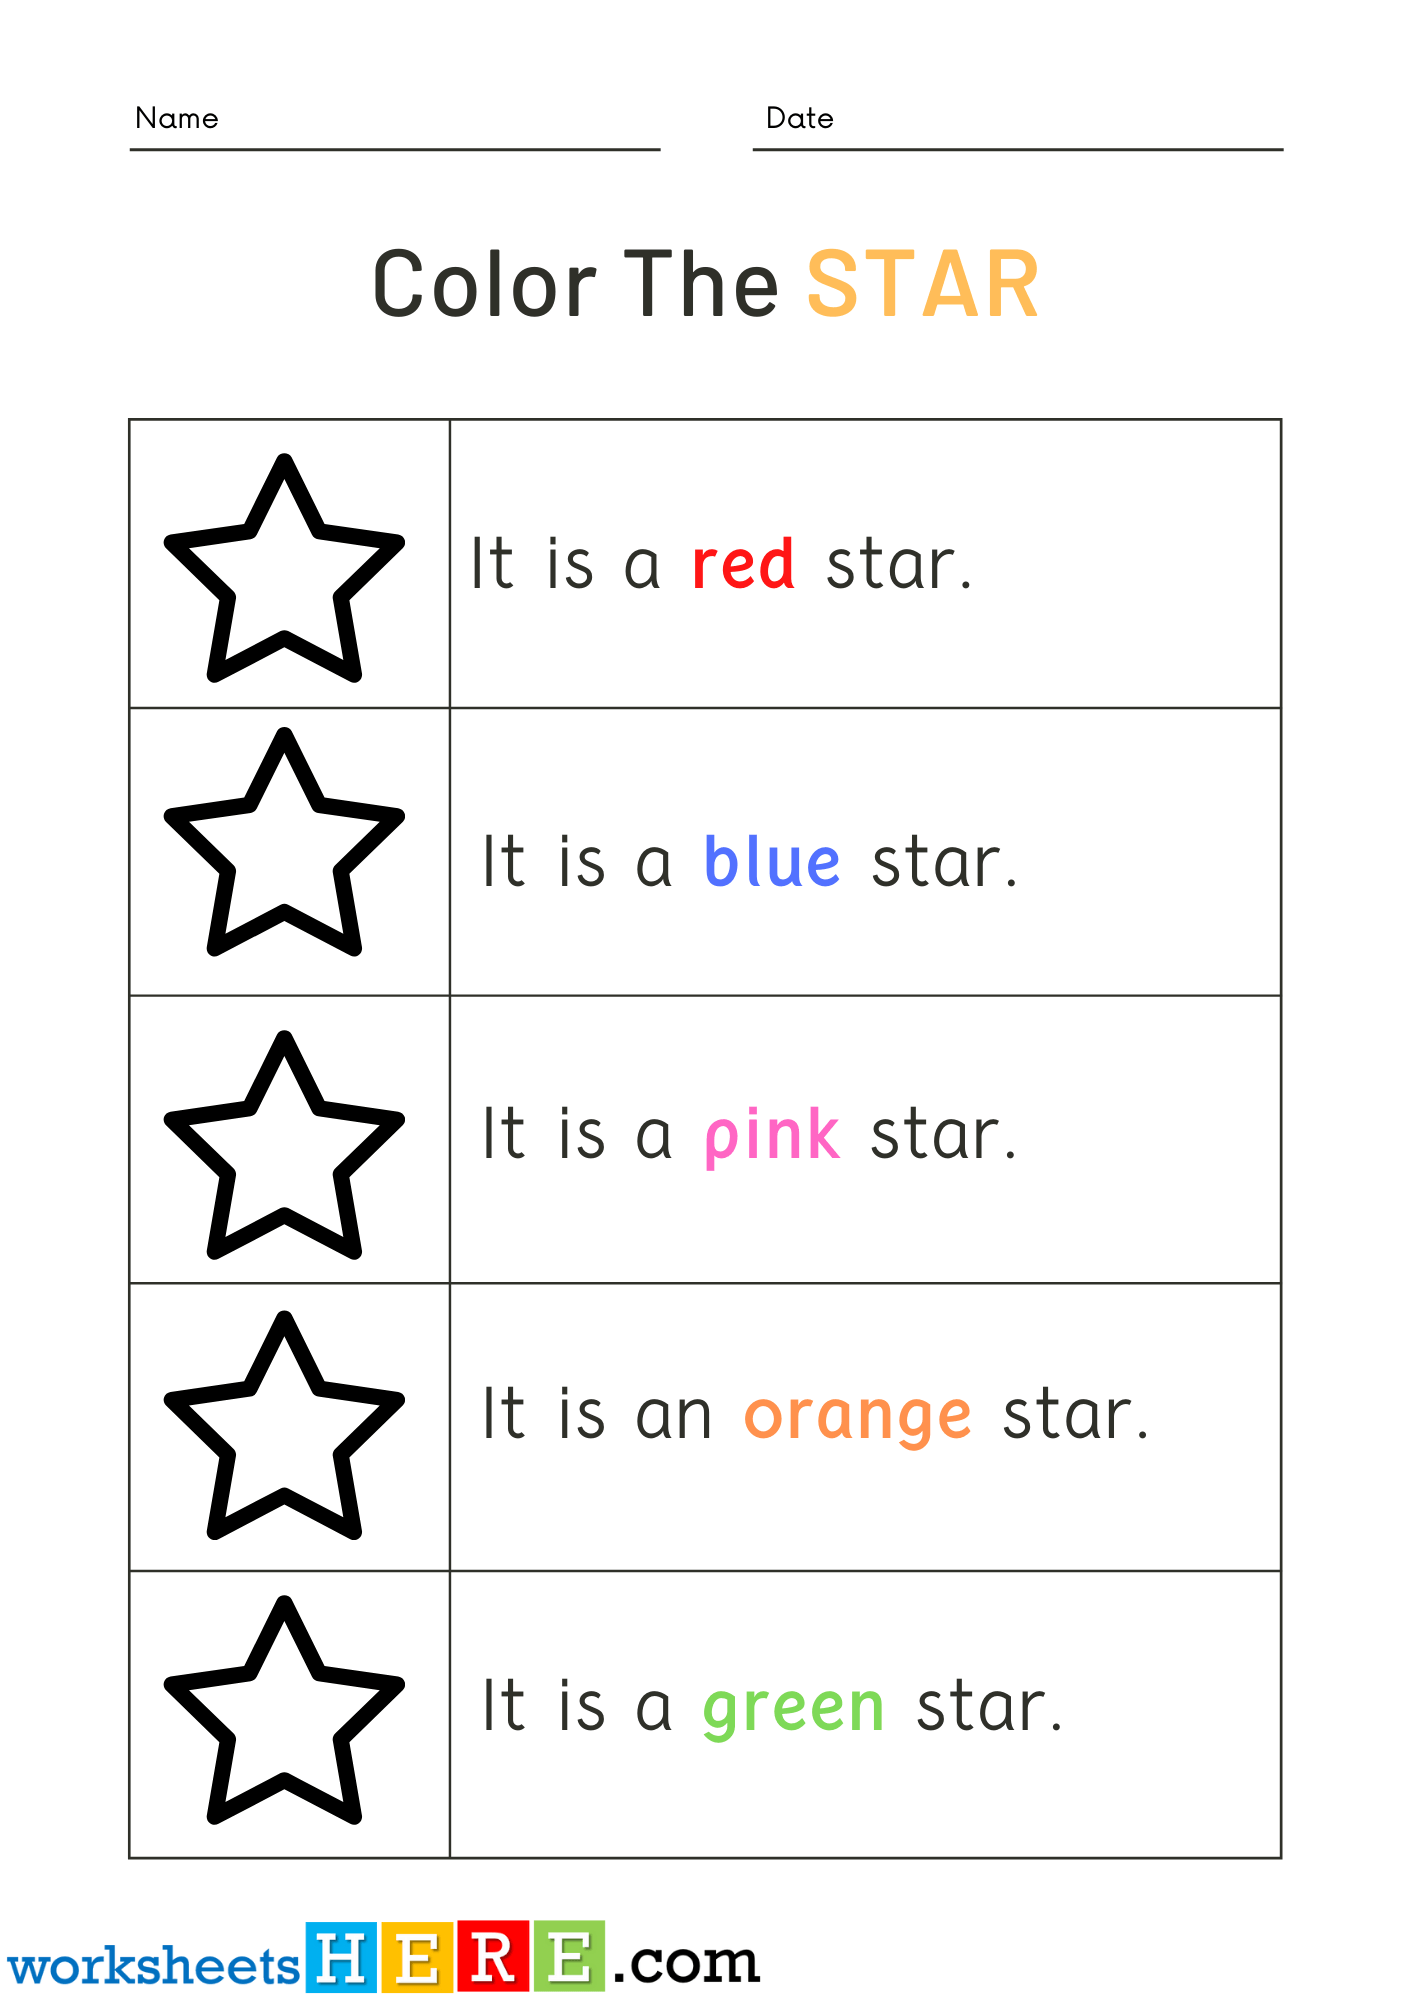 Read Words and Color Stars Pictures Activity PDF Worksheets For Kindergarten